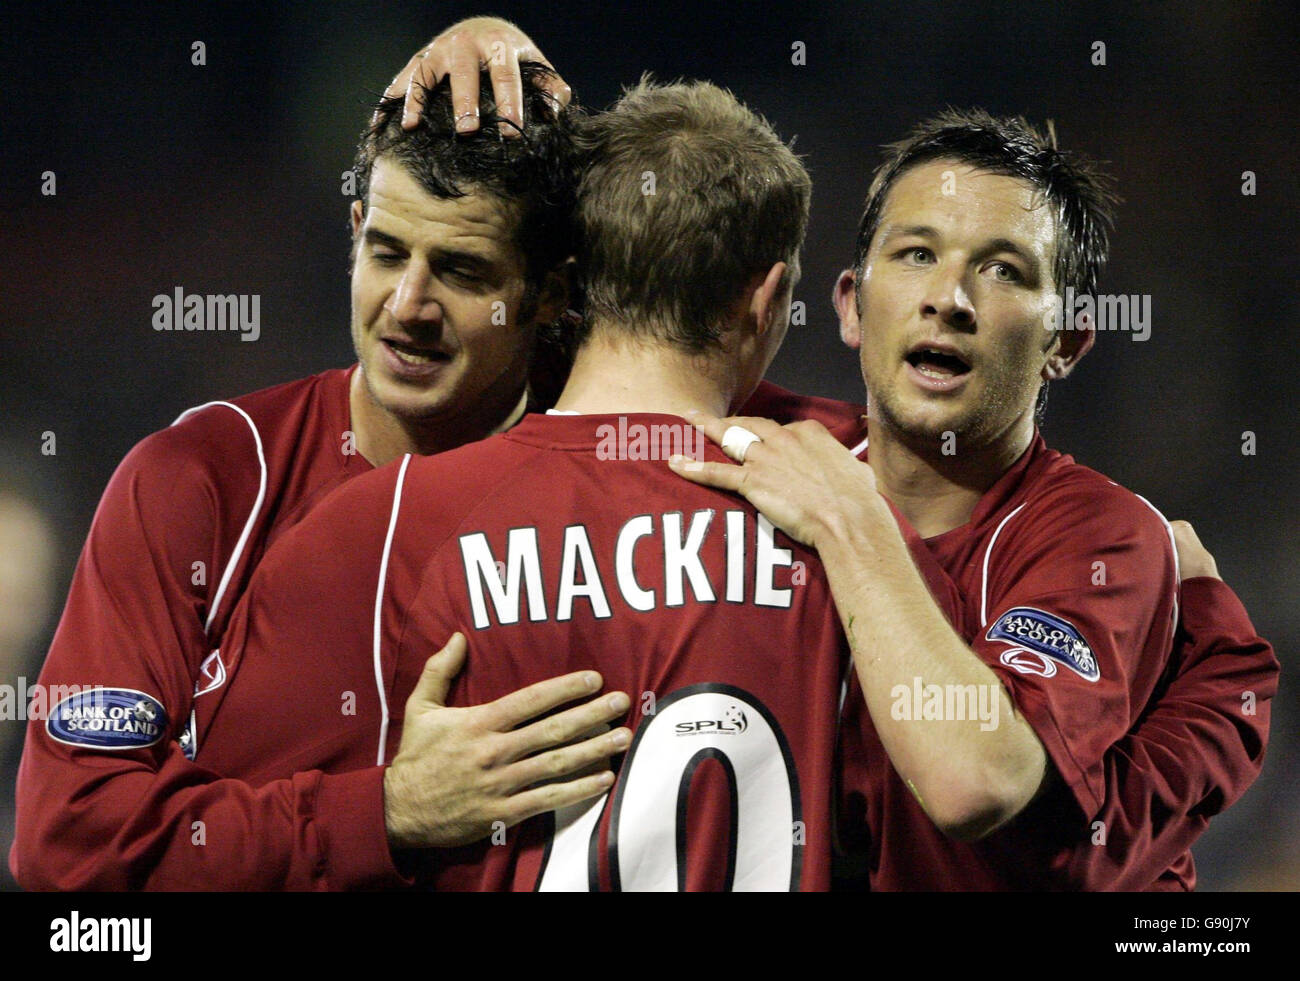 Aberdeen's Stephen Crawford (left) celebrates scoring with teammates Darren Mackie and Barry Nicholson during the Bank of Scotland Premier League match at Pittodrie, Aberdeen, Tuesday October 25, 2005. PRESS ASSOCIATION Photo. Photo credit should read: Andrew Milligan/PA **EDITORIAL USE ONLY** Stock Photo